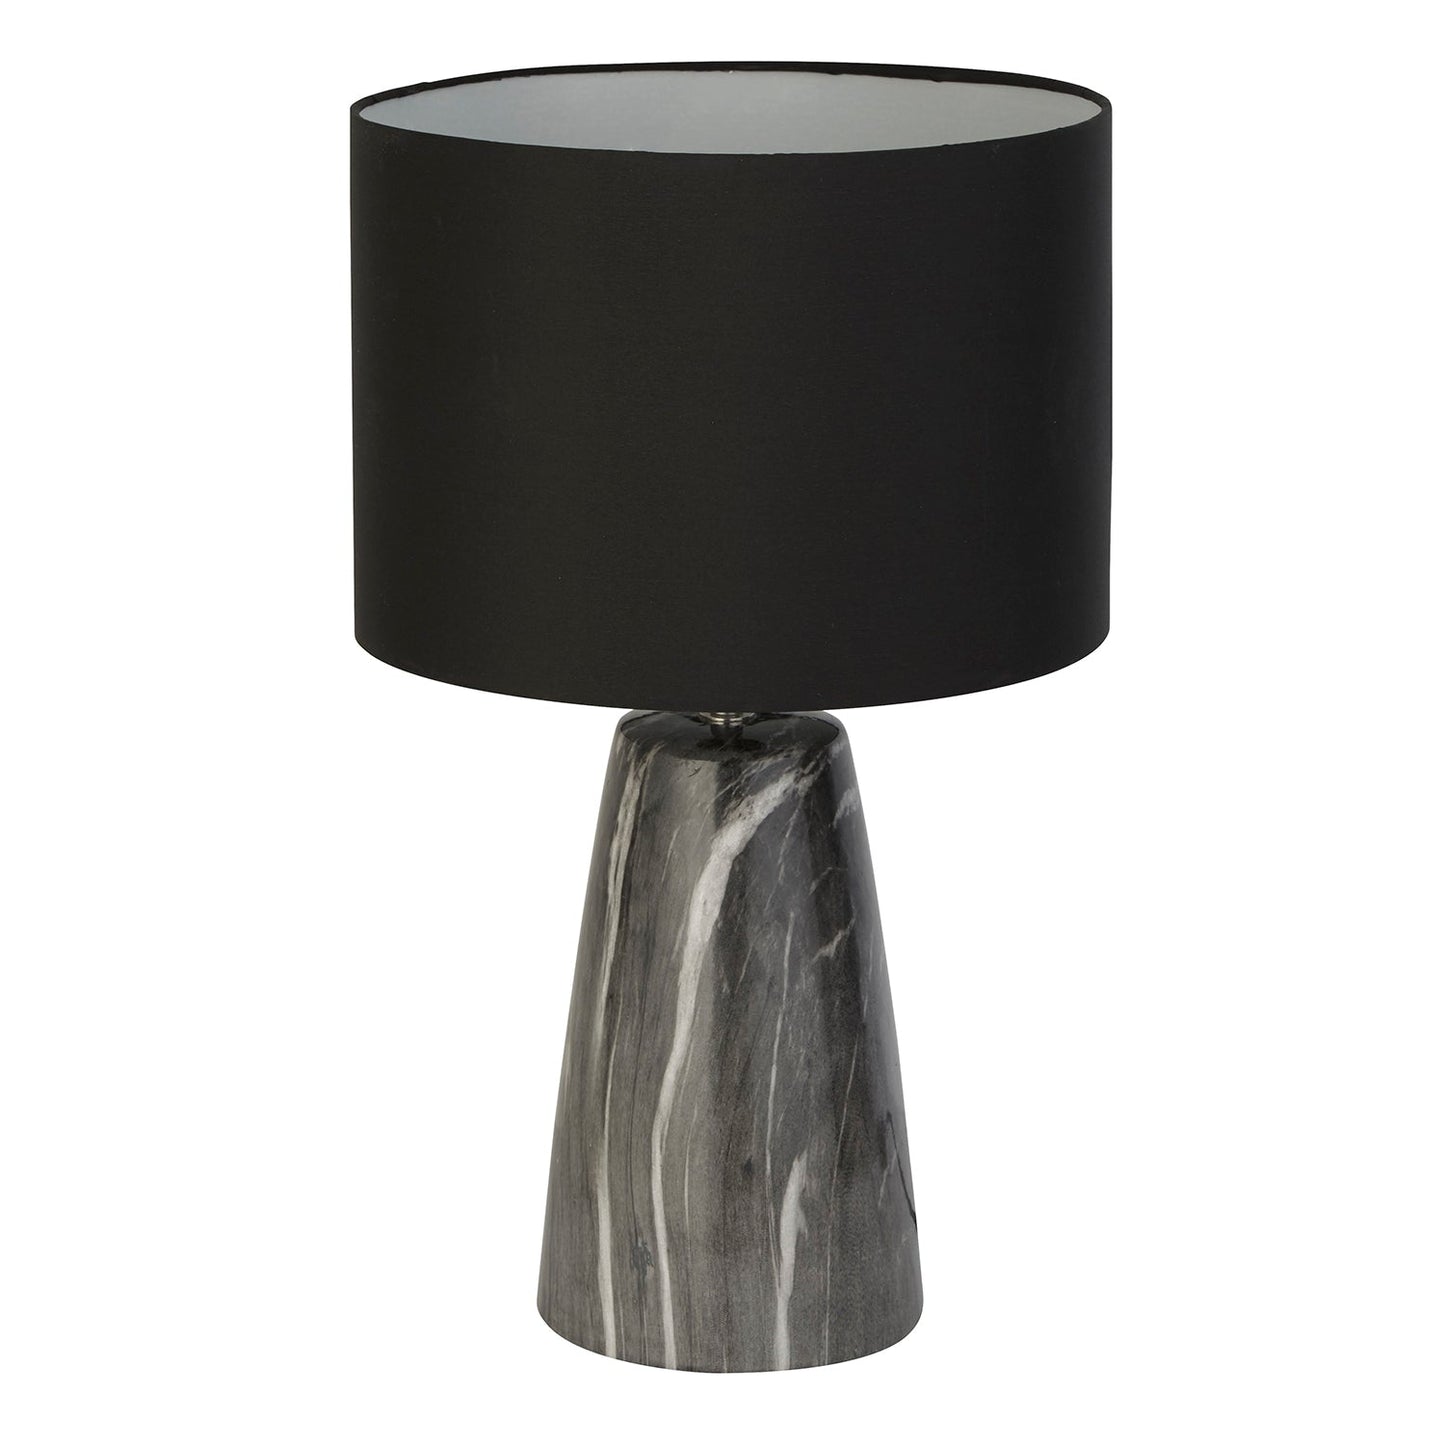 Marble Effect Table Lamp with Black Shade